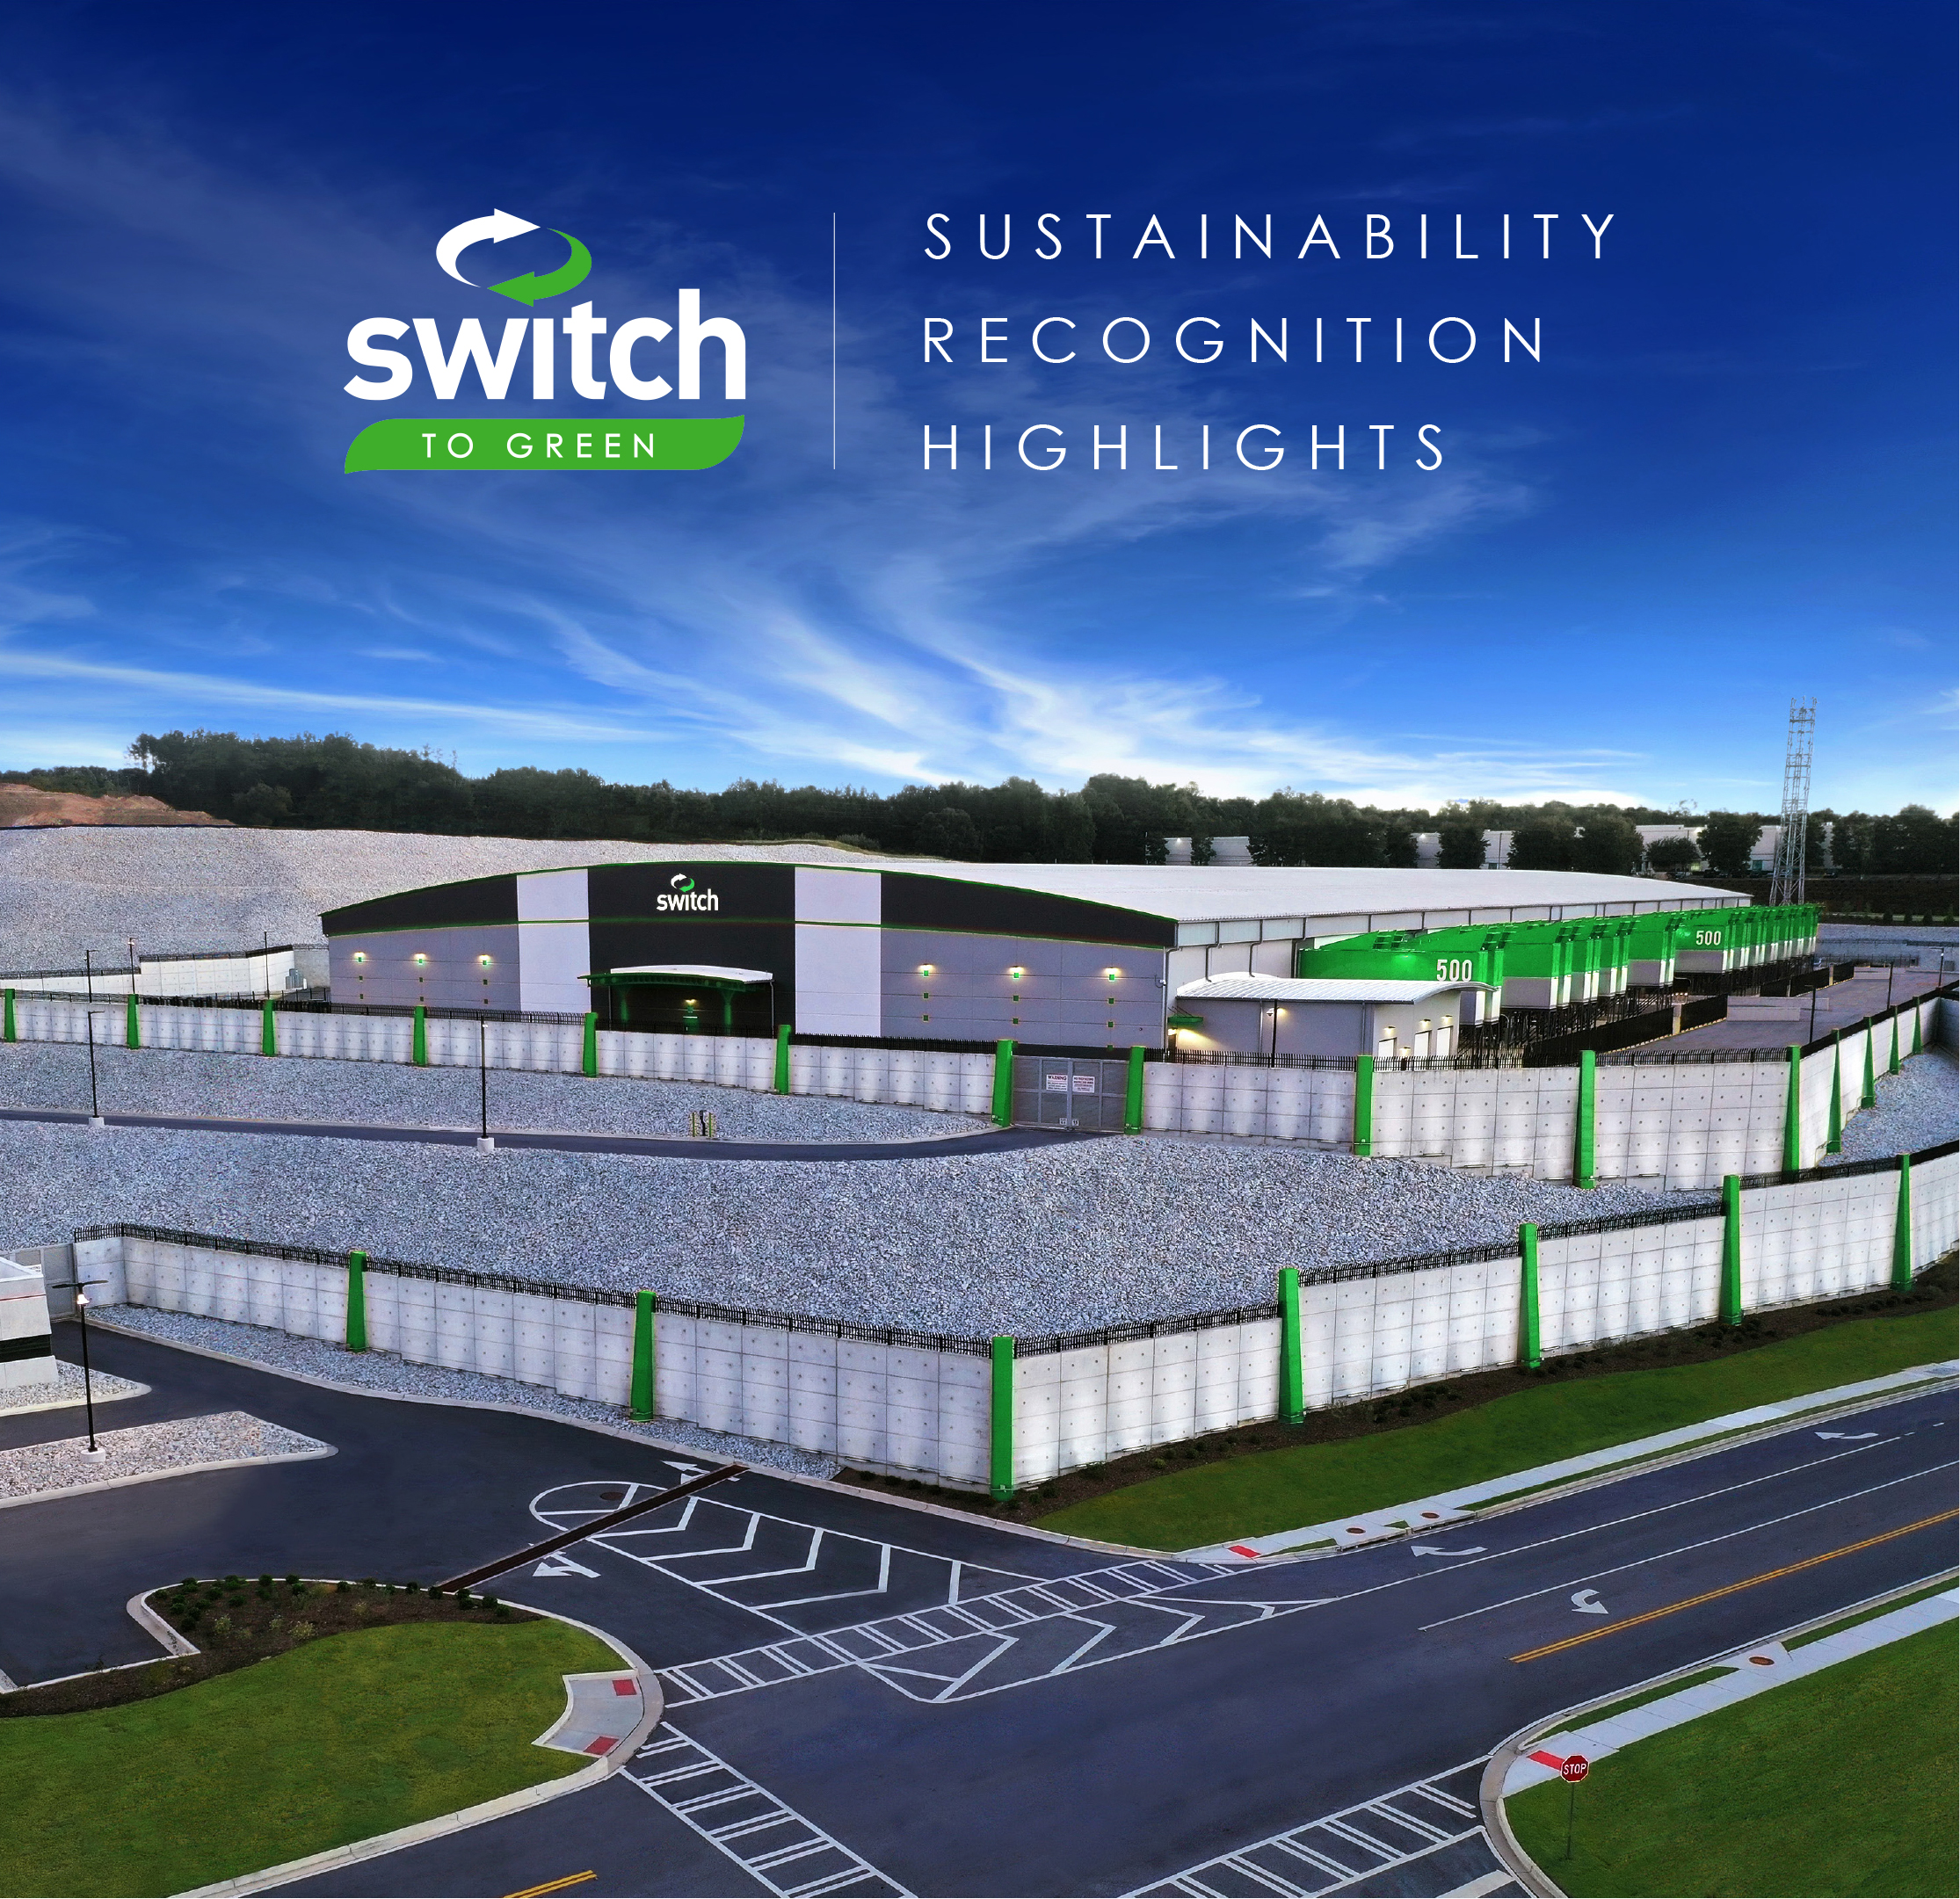 Sustainability Recognition Highlights